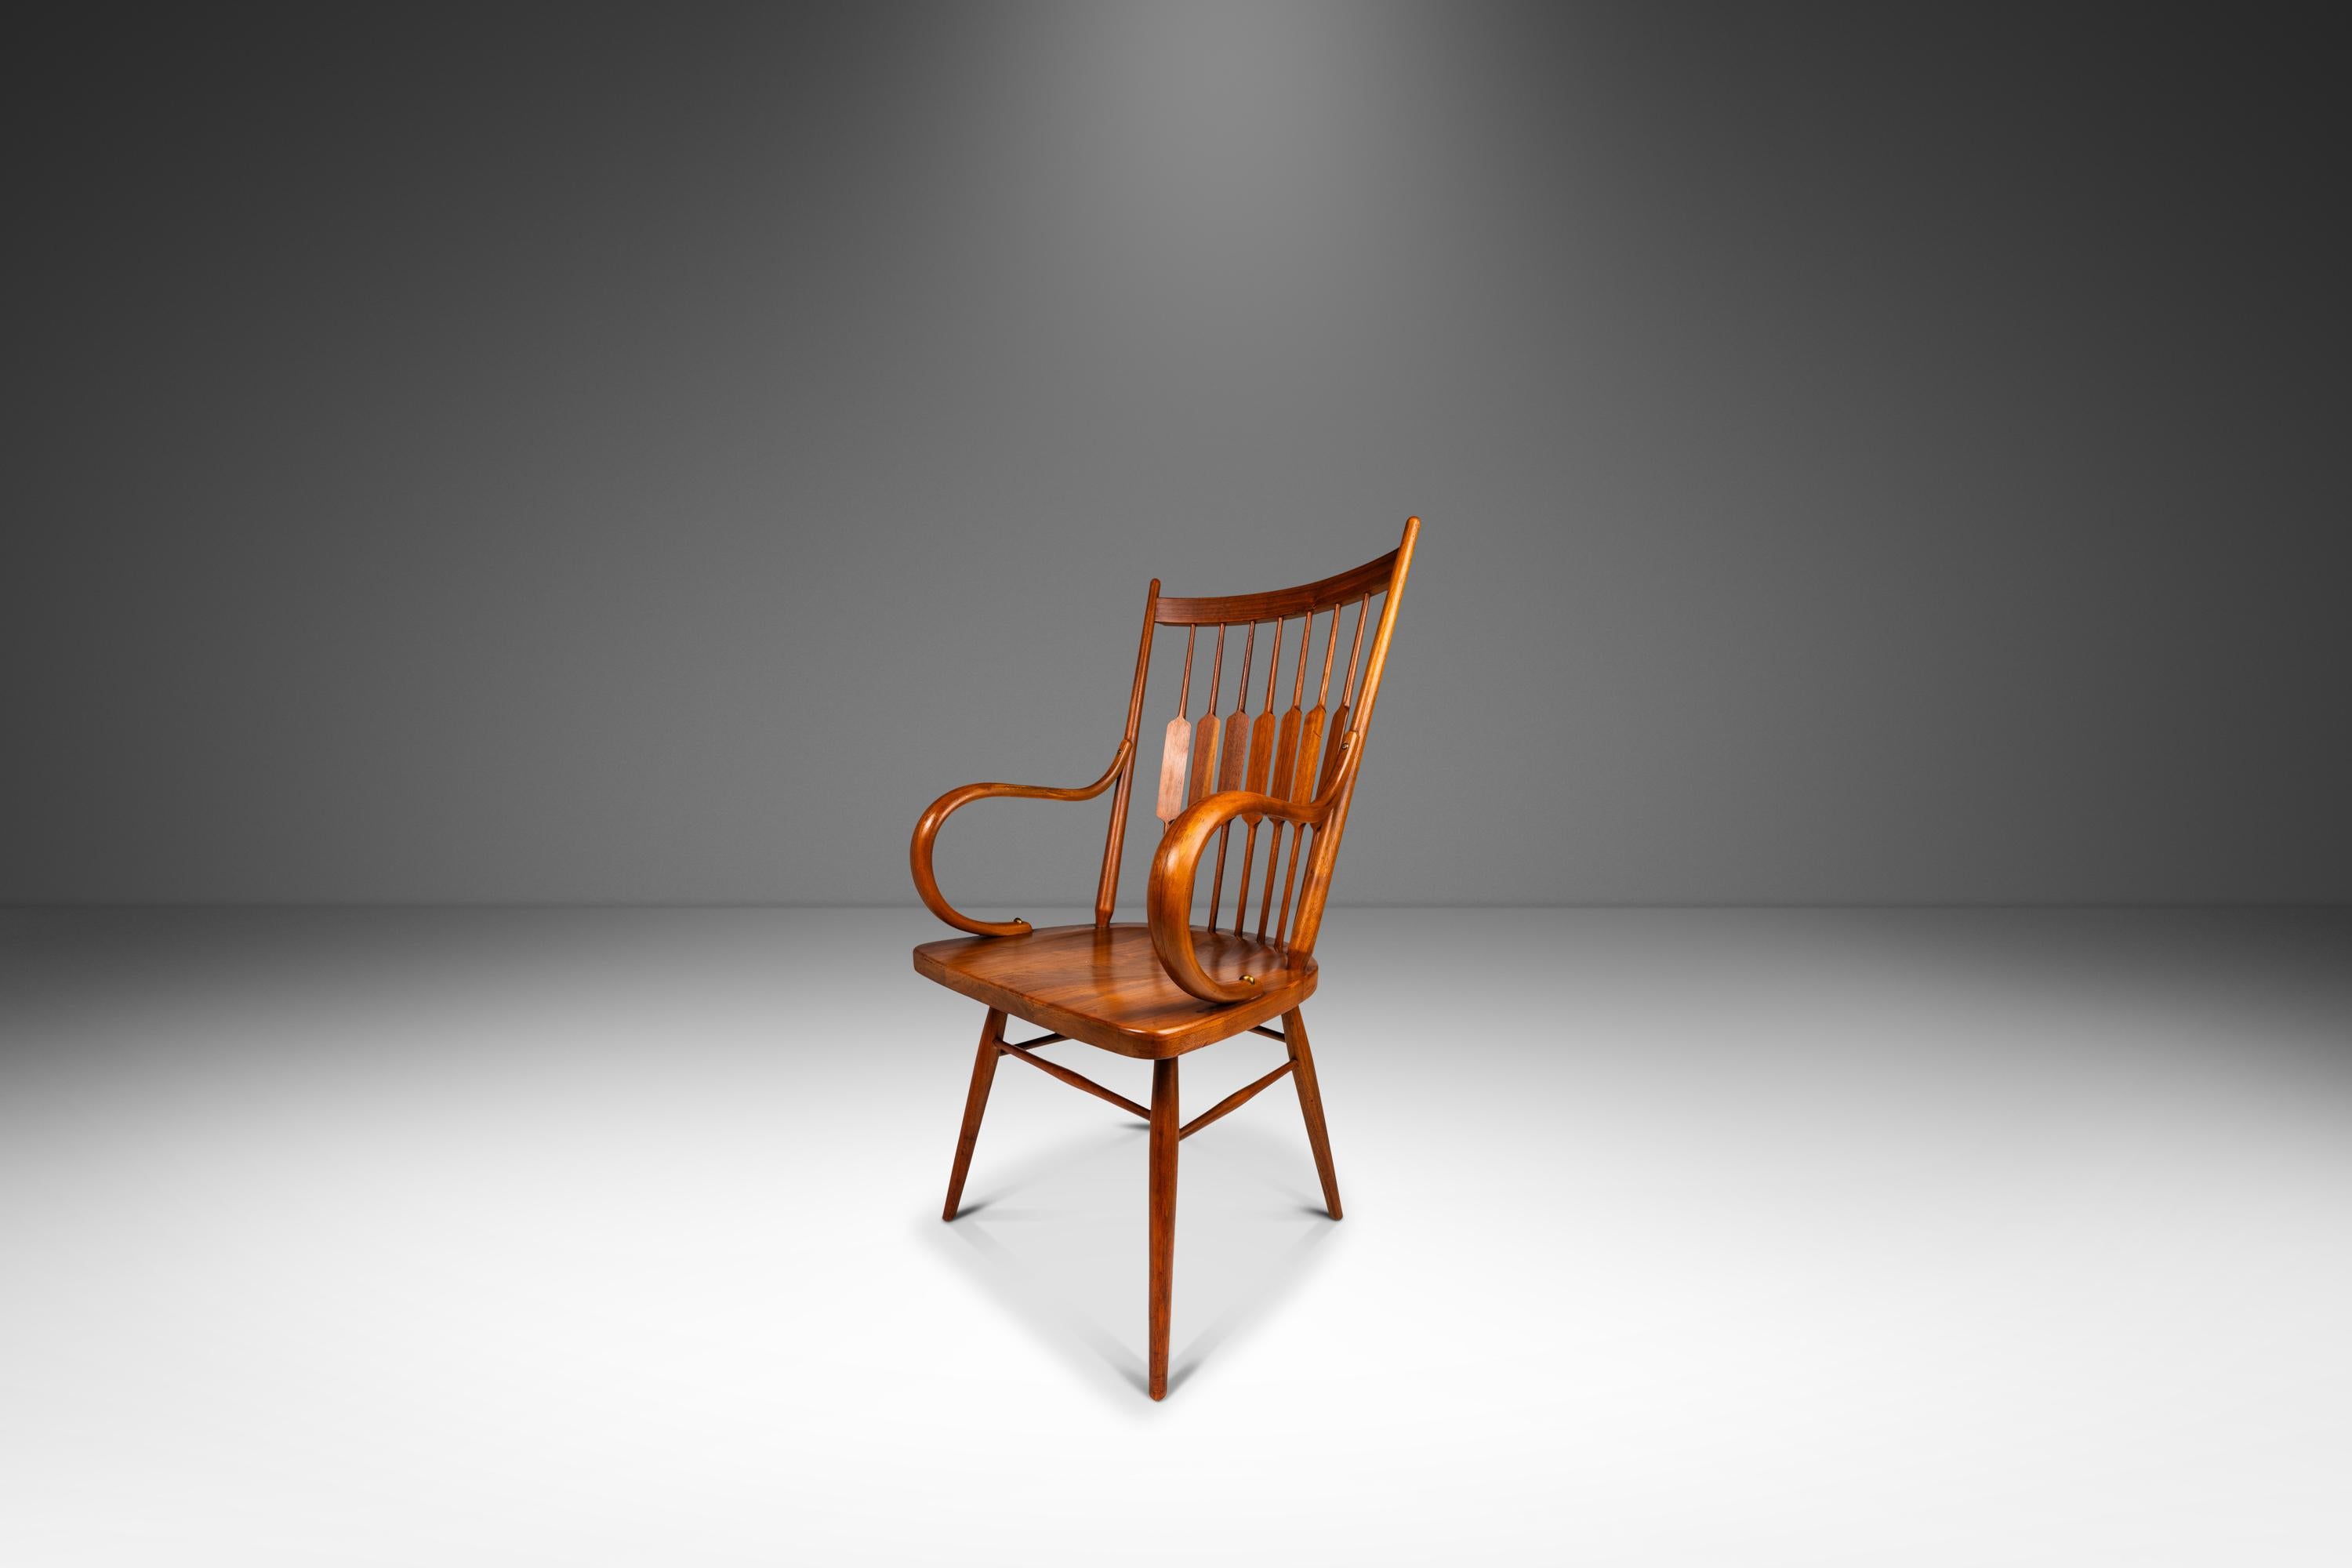 American Set of 2 Windsor Chairs in Solid Walnut by Kipp Stewart for Drexel, USA, c. 1960 For Sale